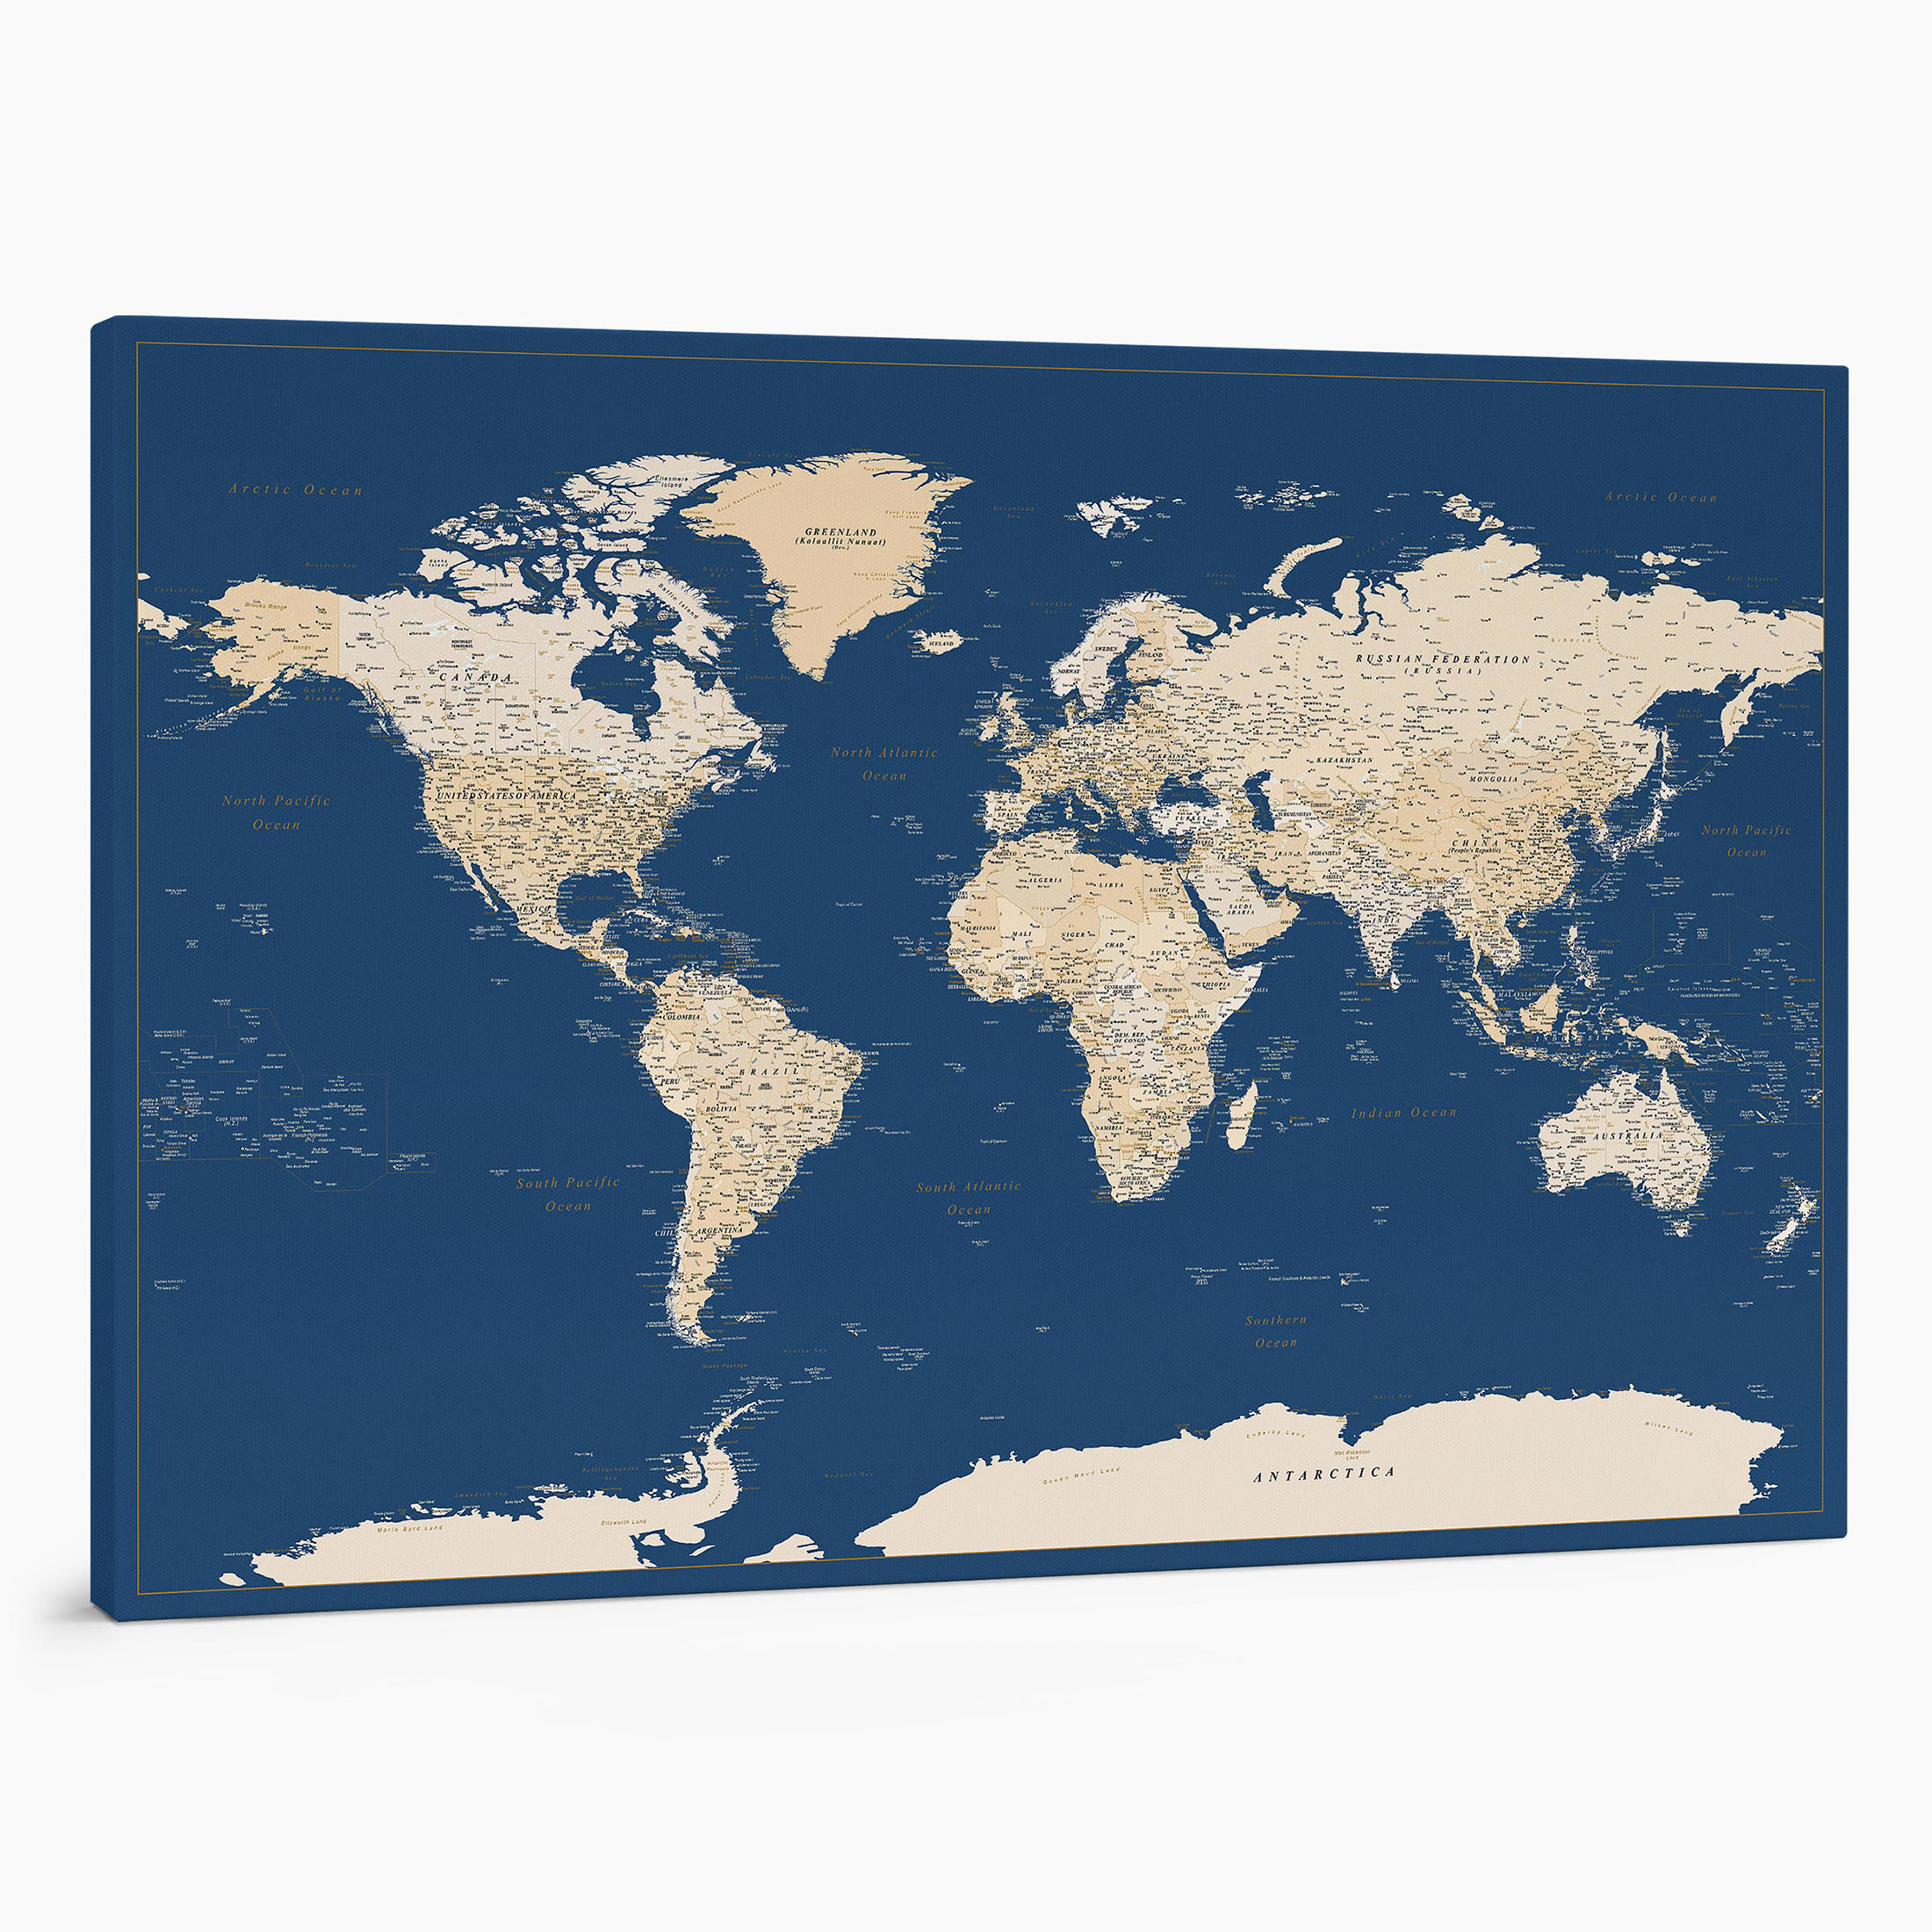 14P large push pin world map to track places visited on canvas dark blue